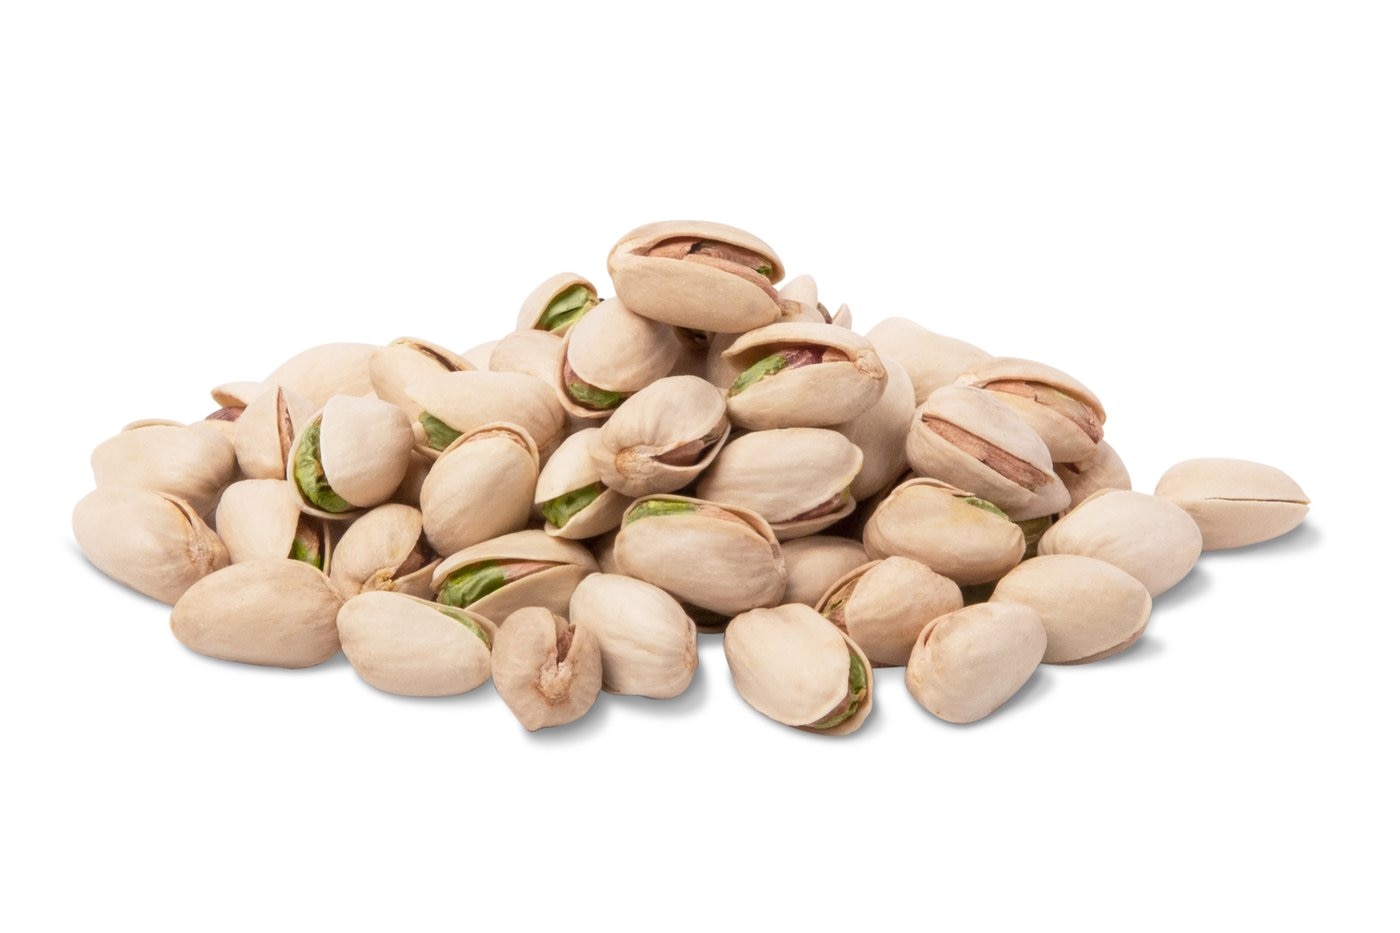 Raw Pistachios (In Shell) image zoom